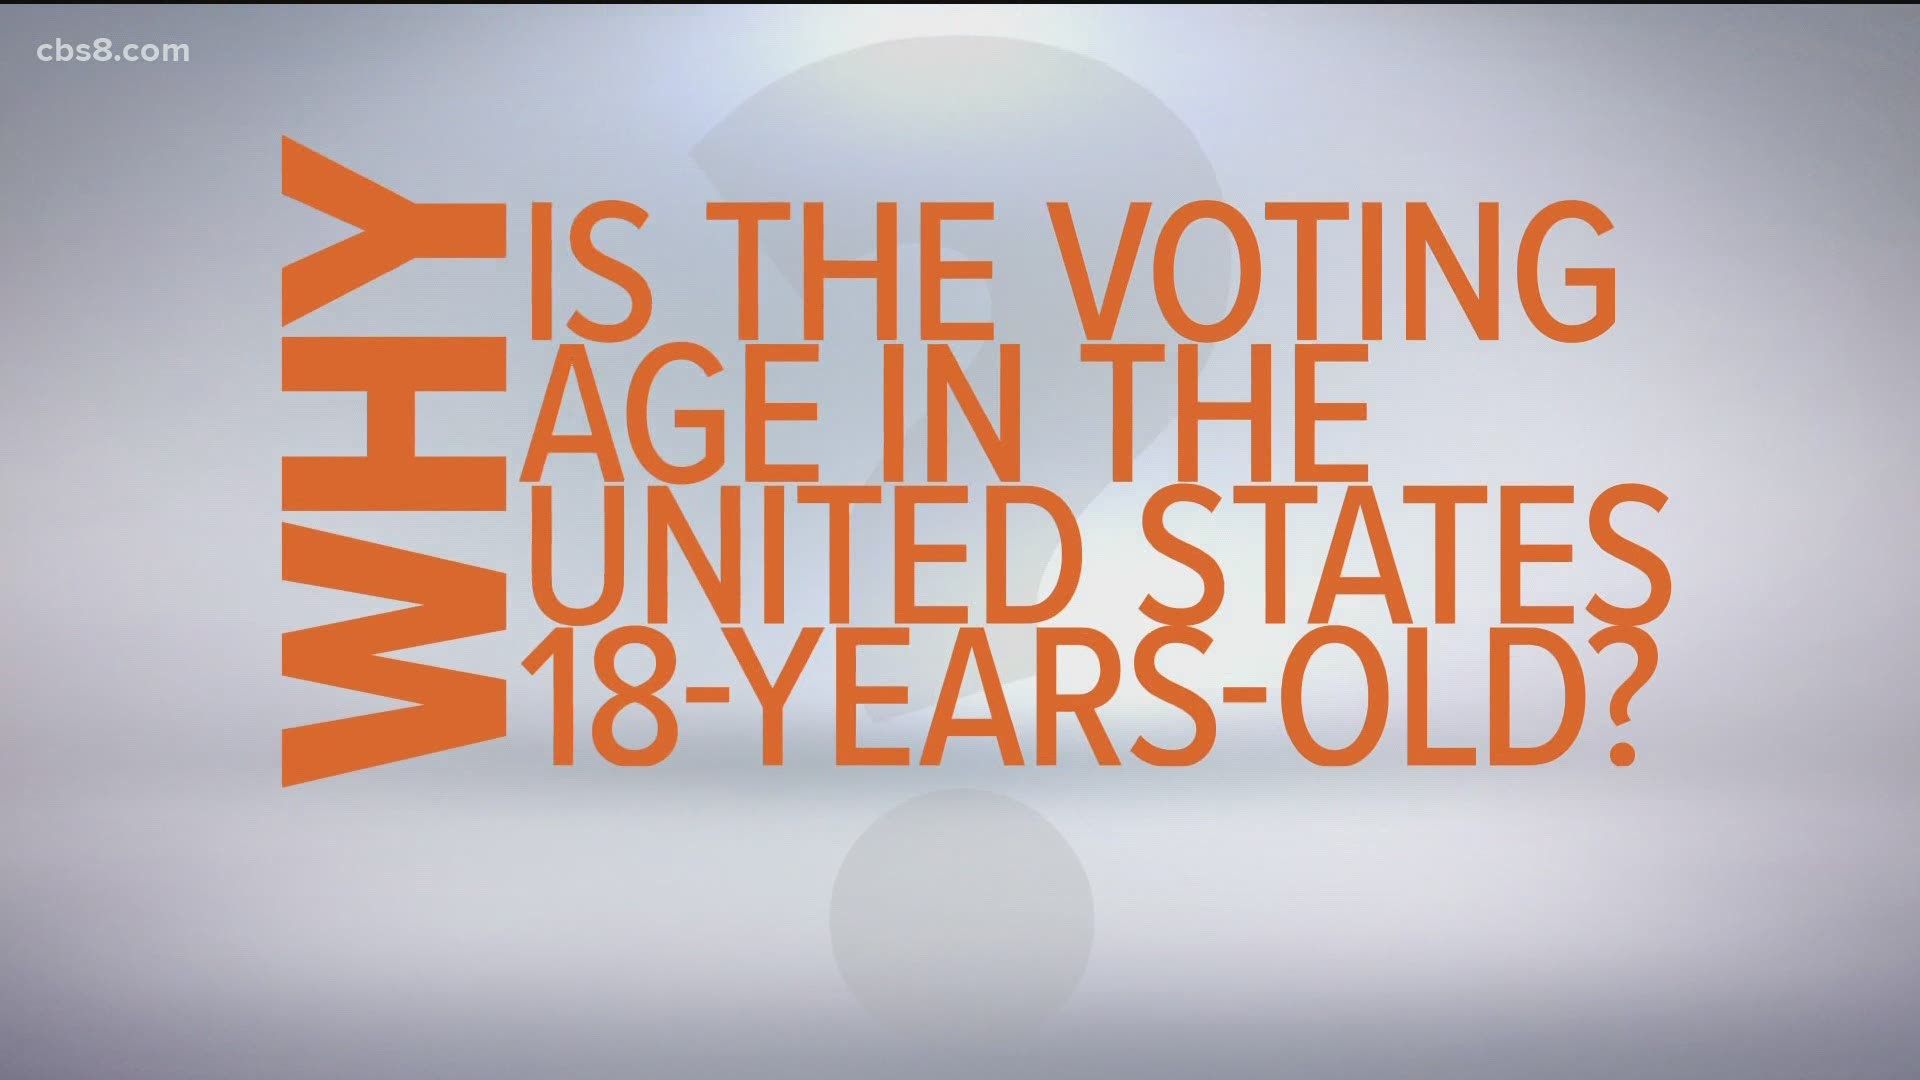 The Voting Rights Act of 1970 lowered the voting age from 21 to 18. Here's a look at the history and the recent push by some to lower the voting age to 16.